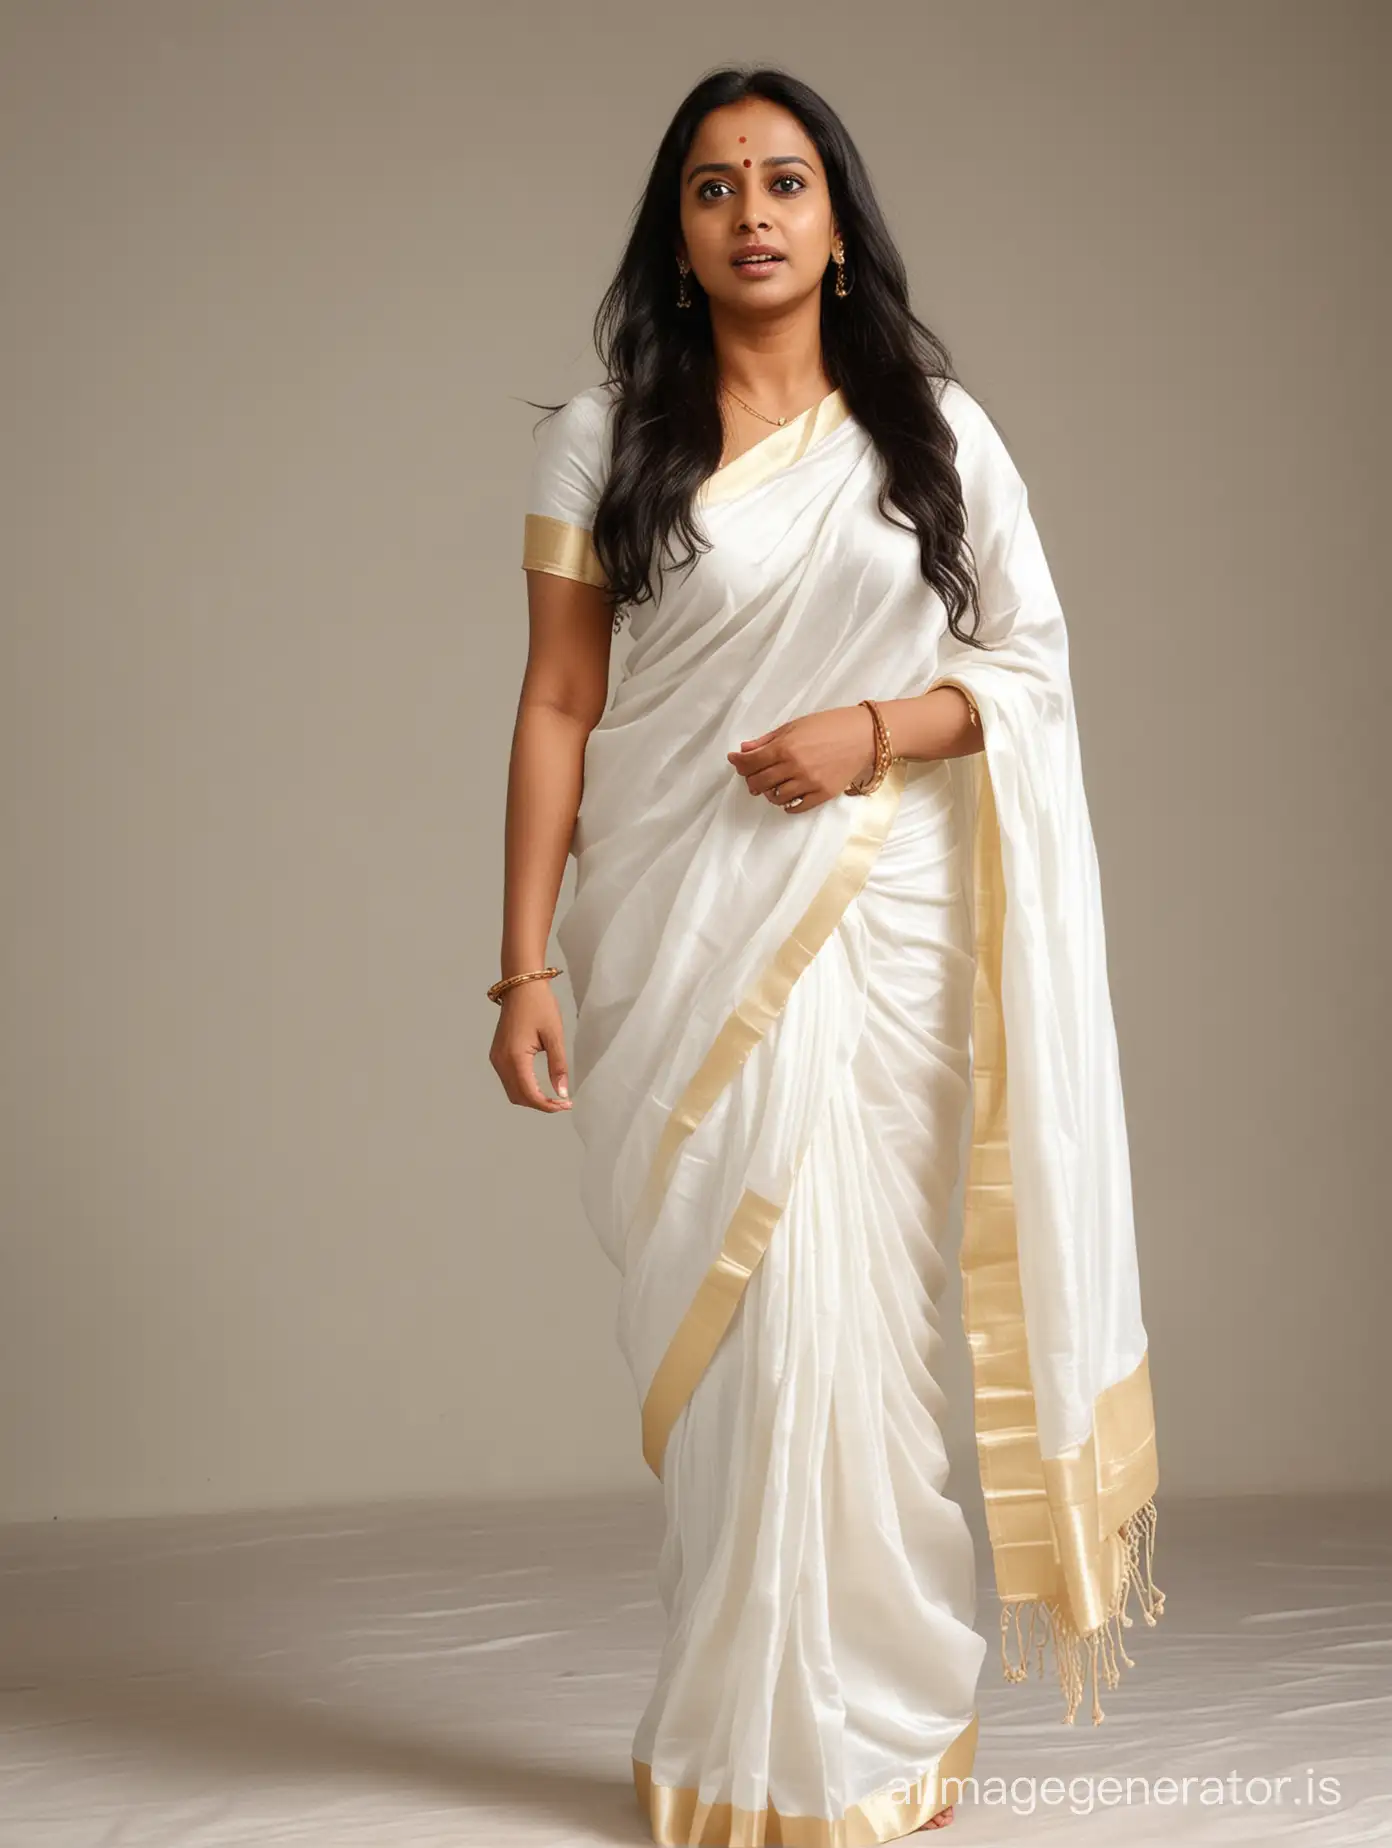 Full body image of A 40 years old kerala woman who looks 99% like malayalam movie actress shalu Menon. The woman is wearing a white silk saree. The woman has very long hair and perfect body. The woman is extremely angry and shouting